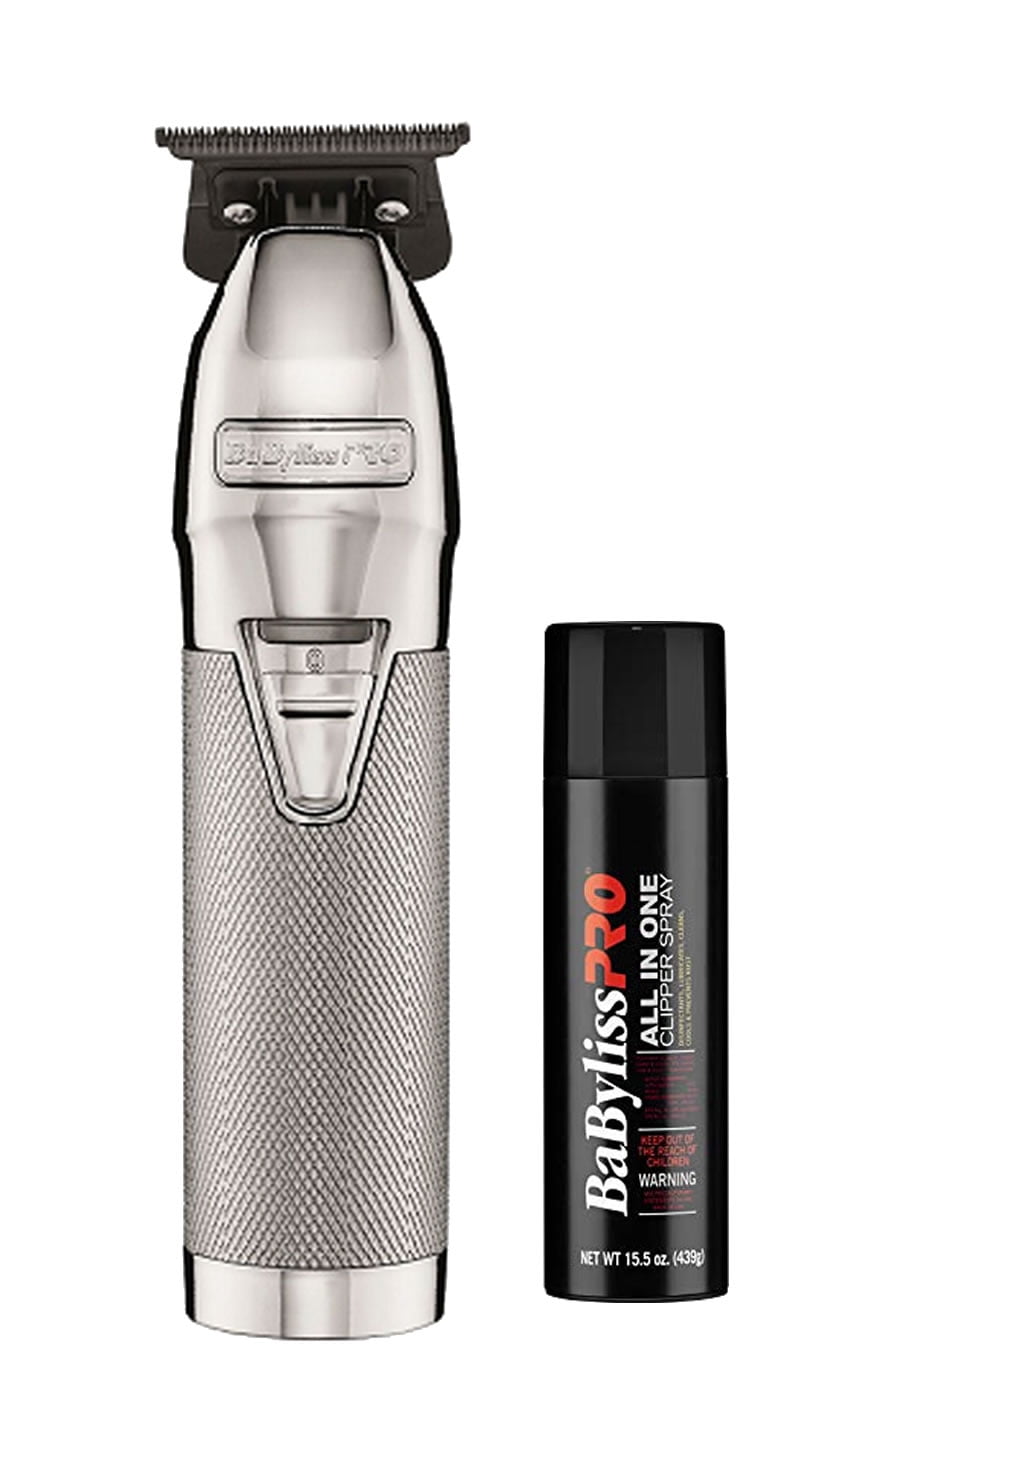 BaBylissPRO SilverFX Outlining Trimmer FX787S and Clipper Spray Set